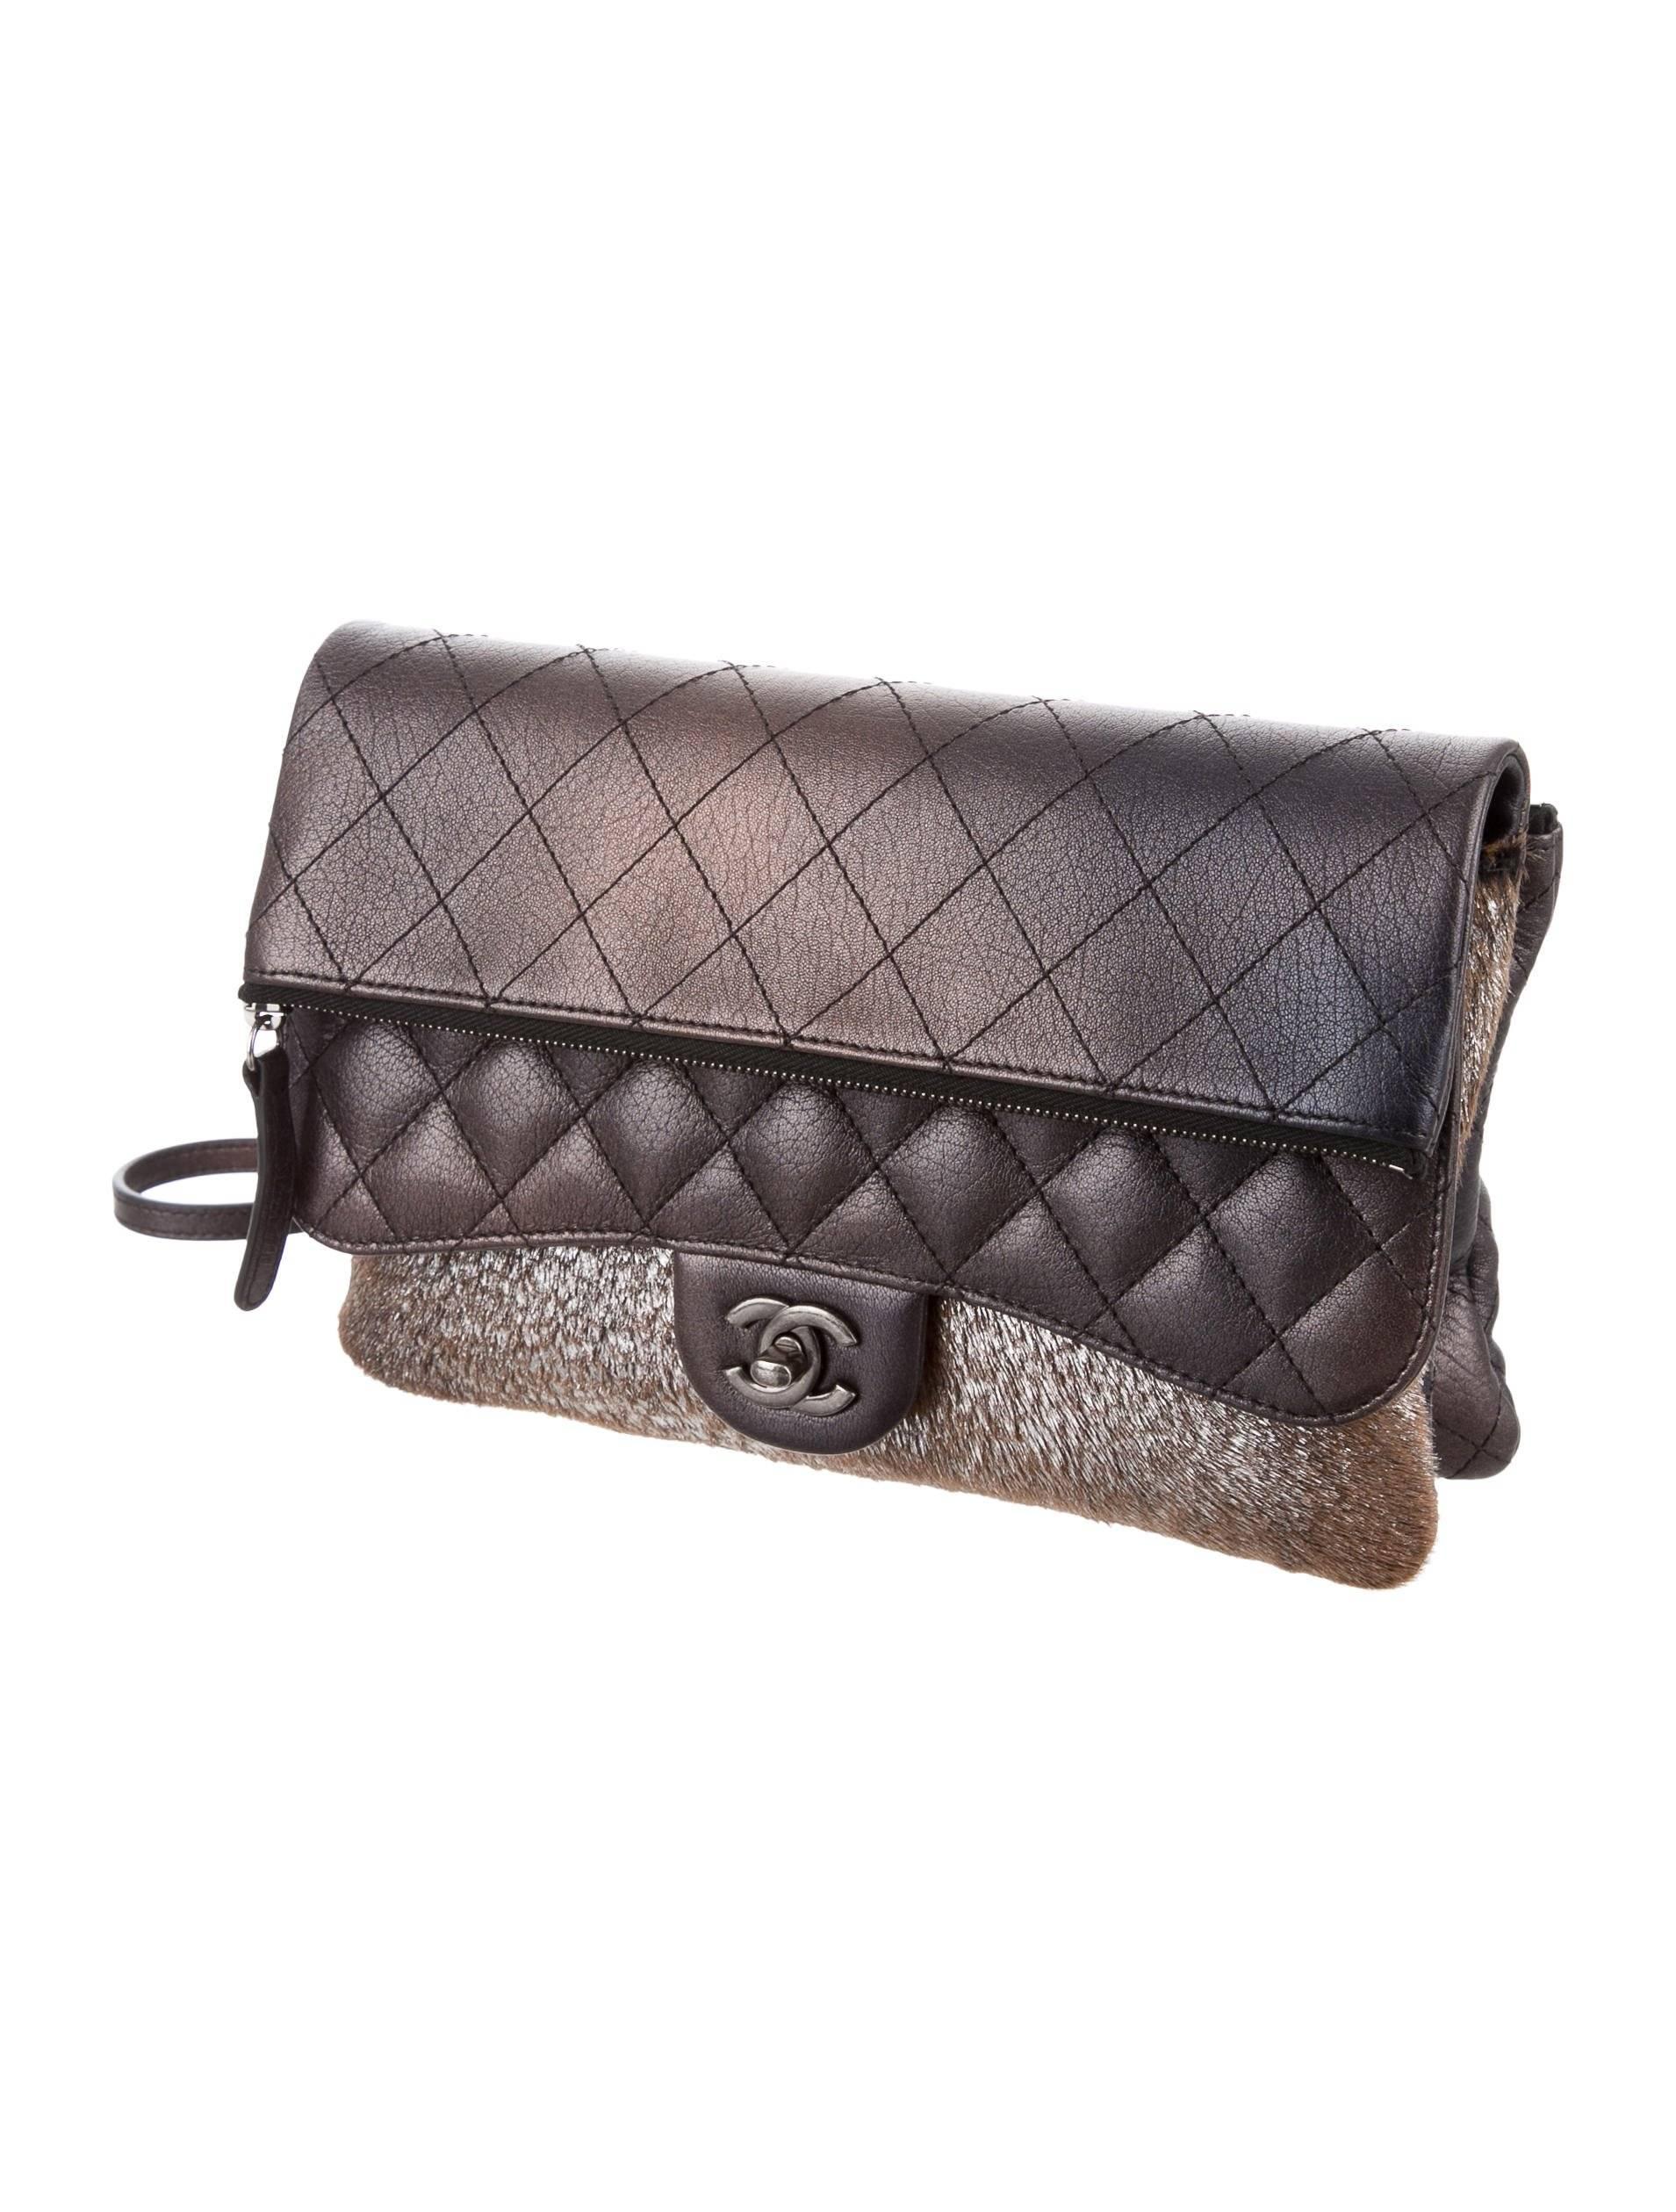 Chanel New Bronze Ombre Leather Envelope Pony Evening Shoulder Flap Bag

Leather
Ponyhair 
Silver tone hardware
Woven lining
Turn lock closure
Date code present
Made in Italy
Shoulder strap drop 21.5"
Measures 10" W x 6.5" H x